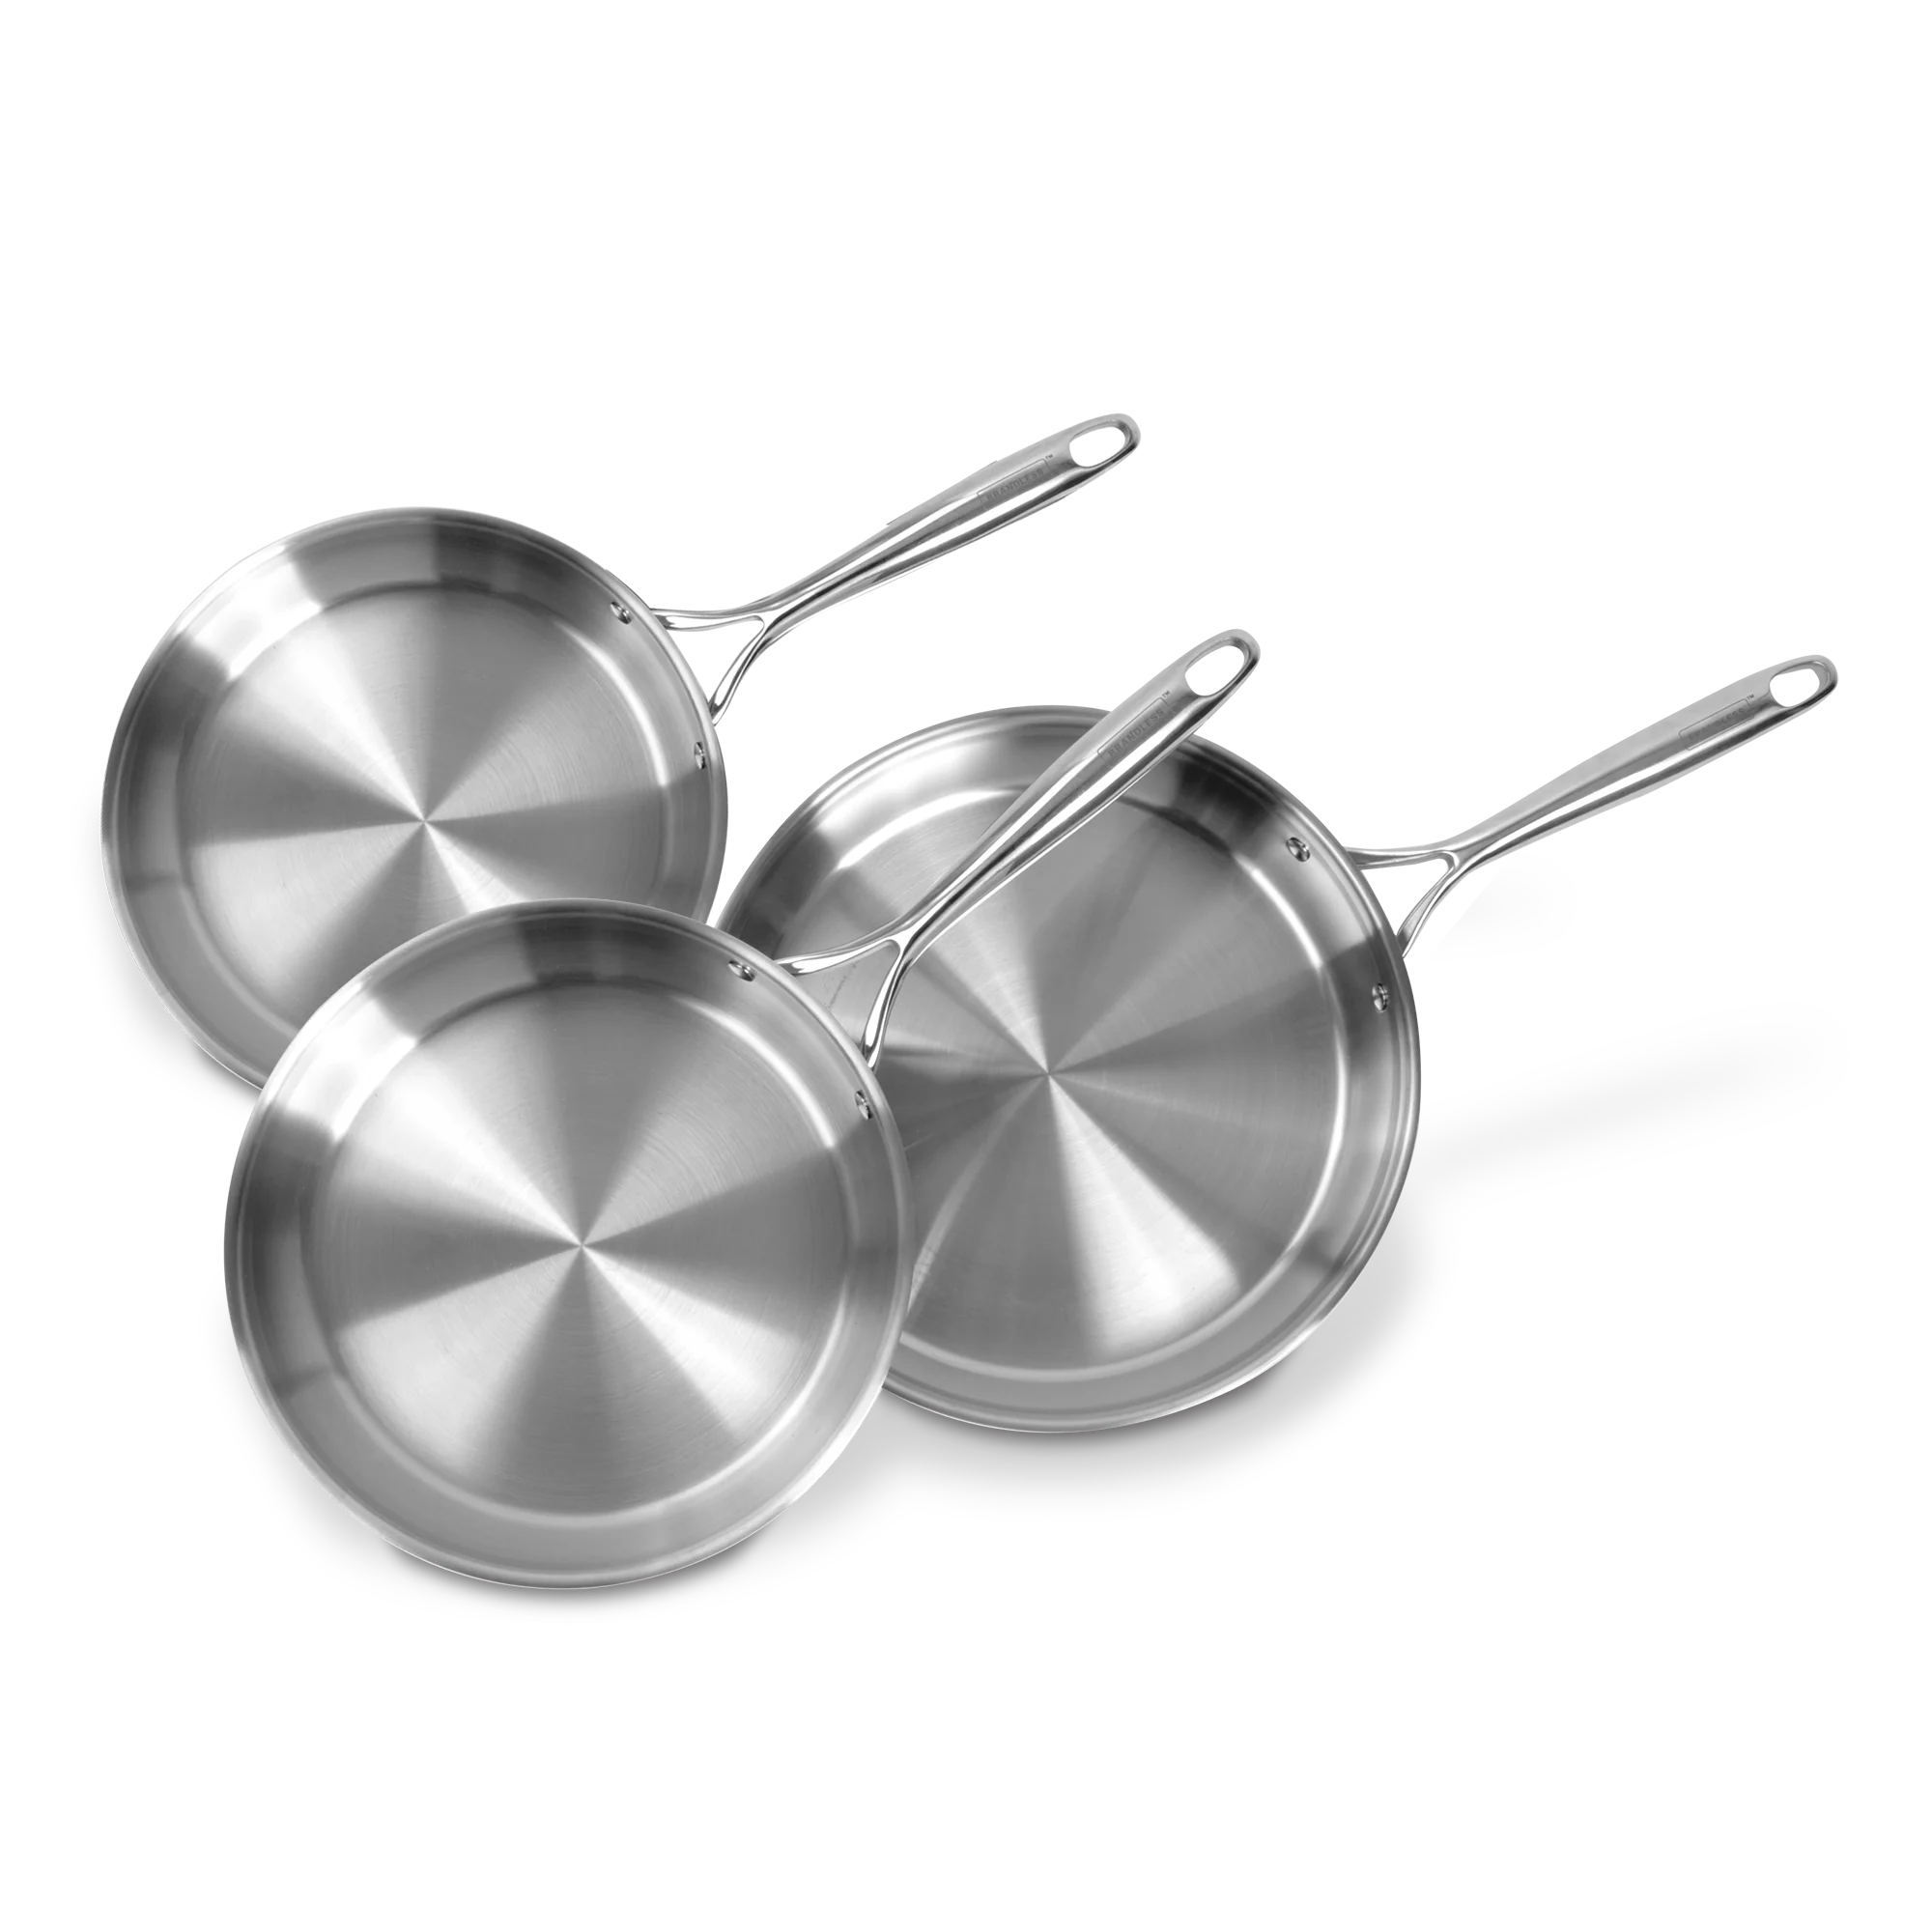 Brandless Stainless Steel Fry Pans in 8, 10, and 12 inch sizes